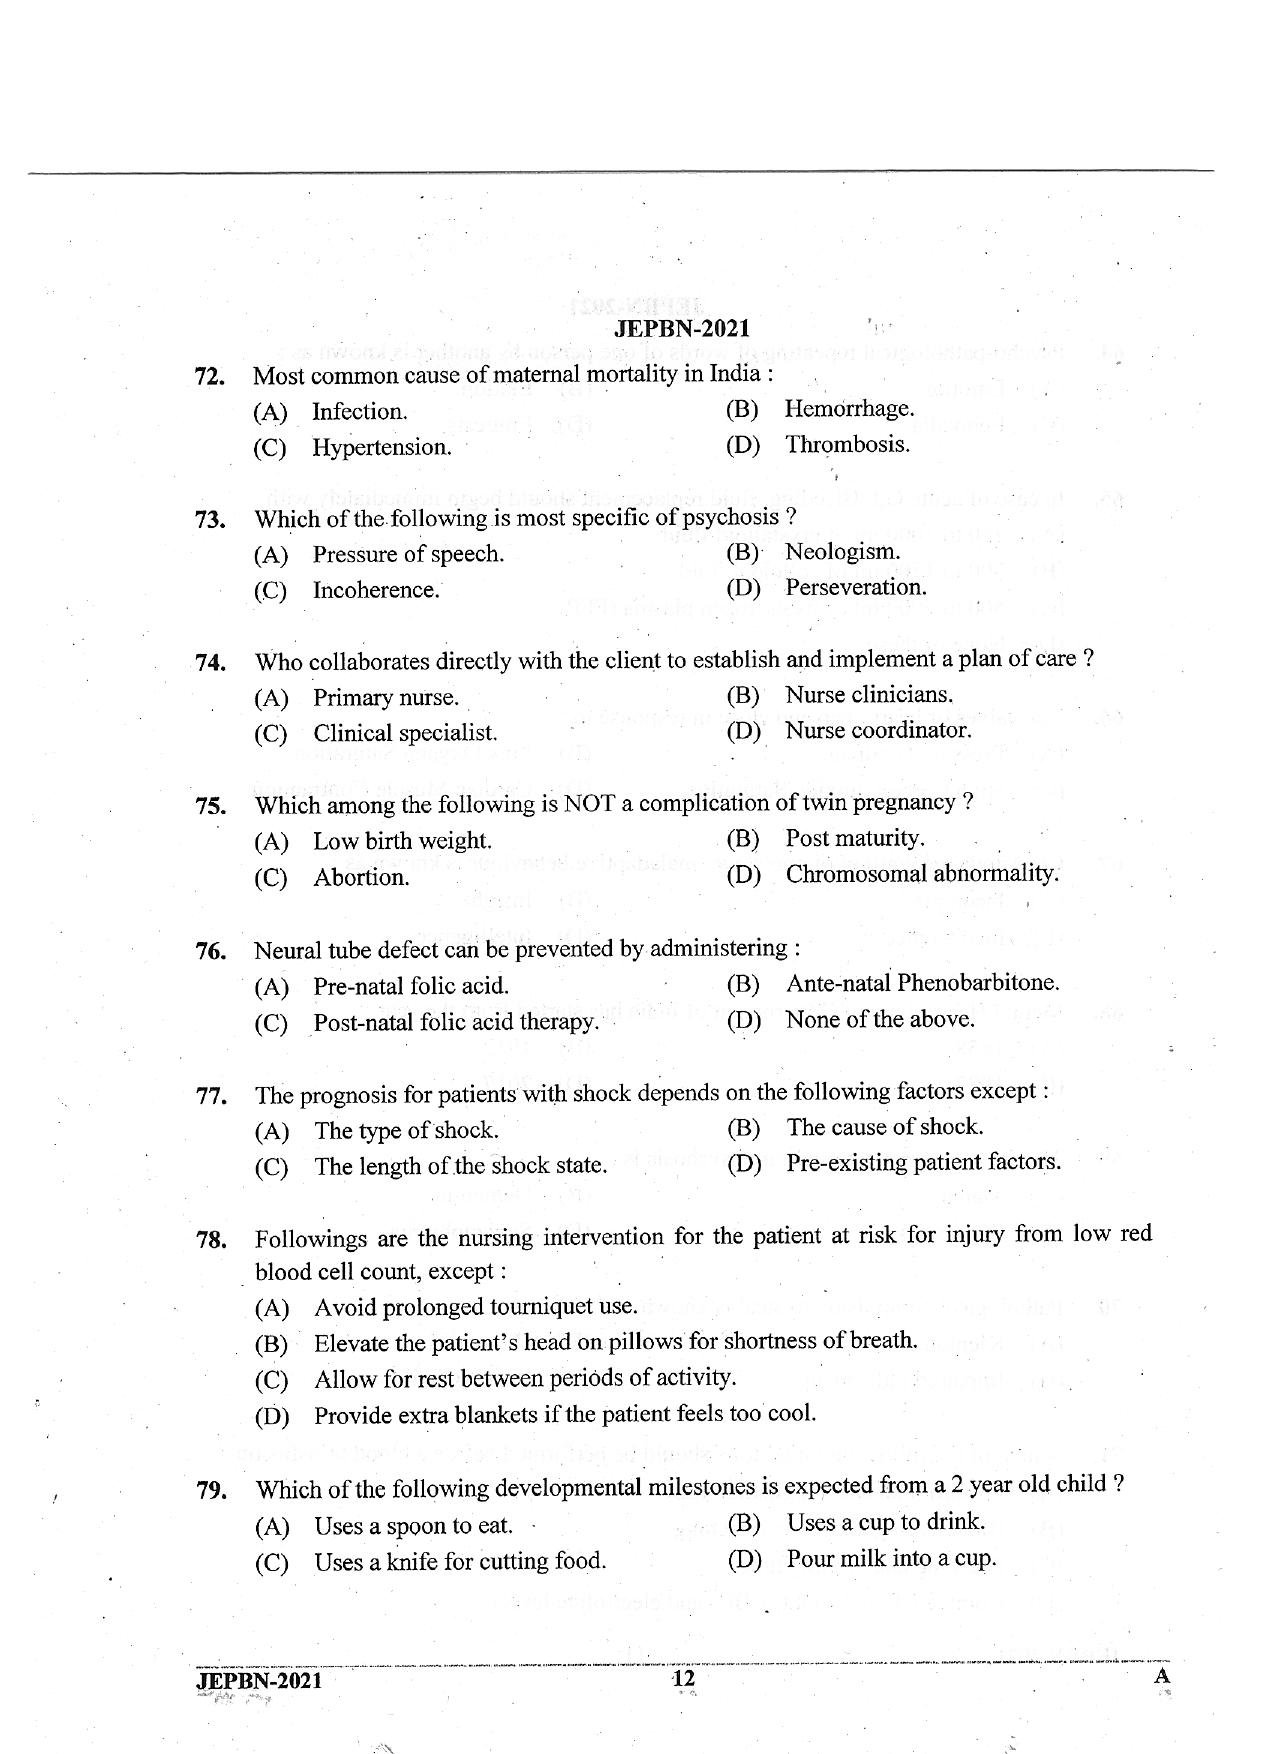 WBJEE JEPBN 2021 Question Paper - Page 12